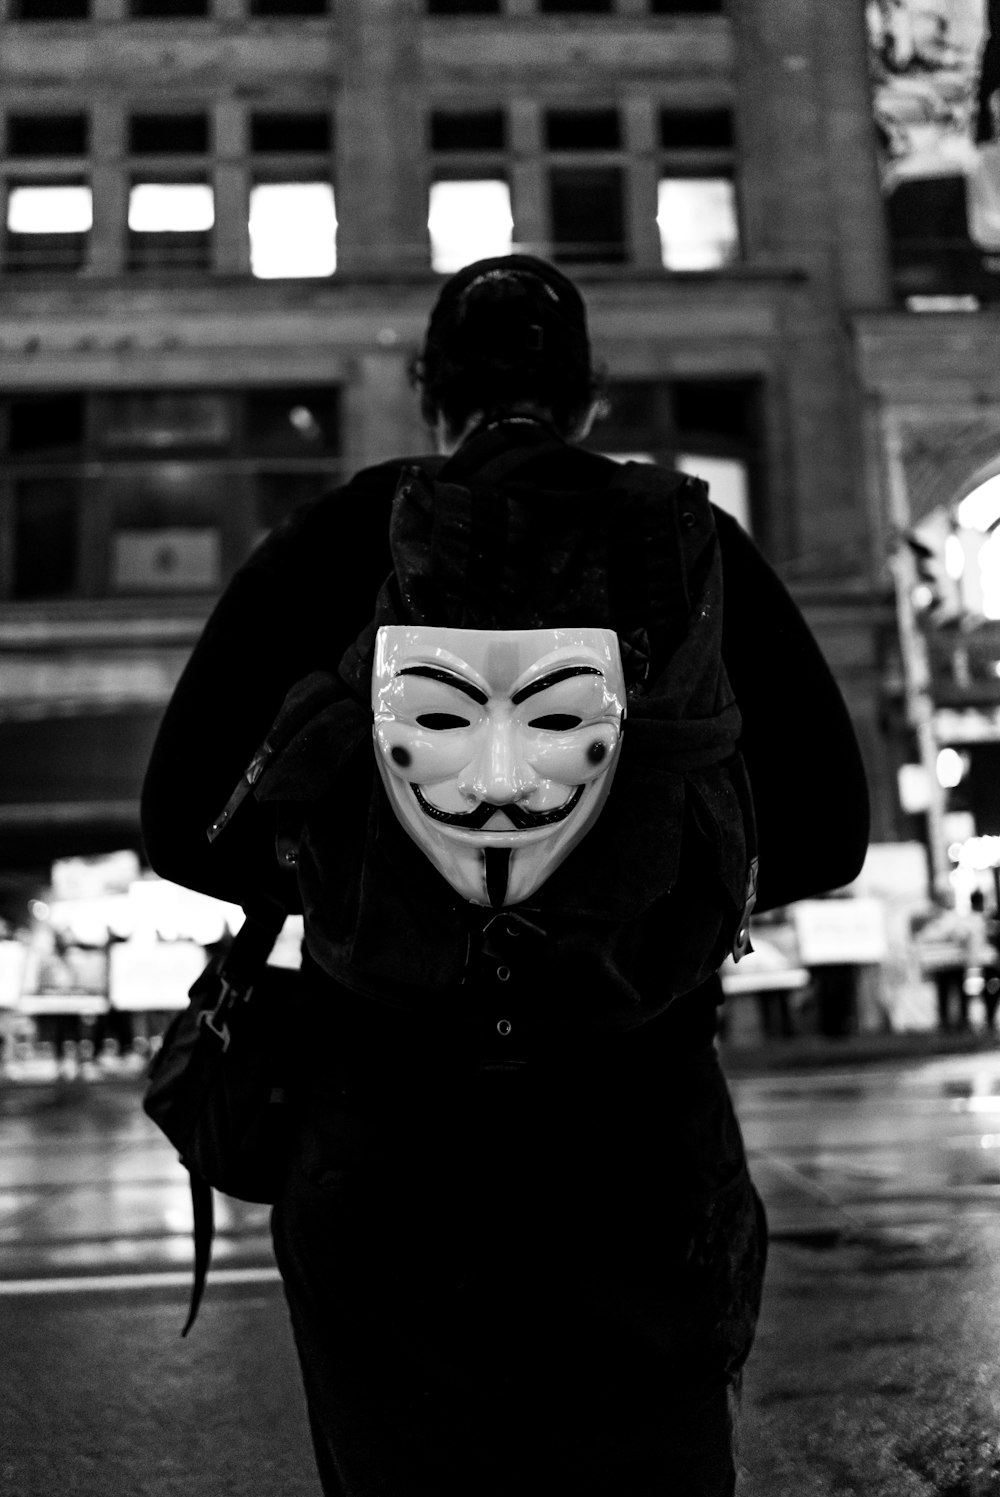 grayscale photography of person walking guy fawkes mask backpack